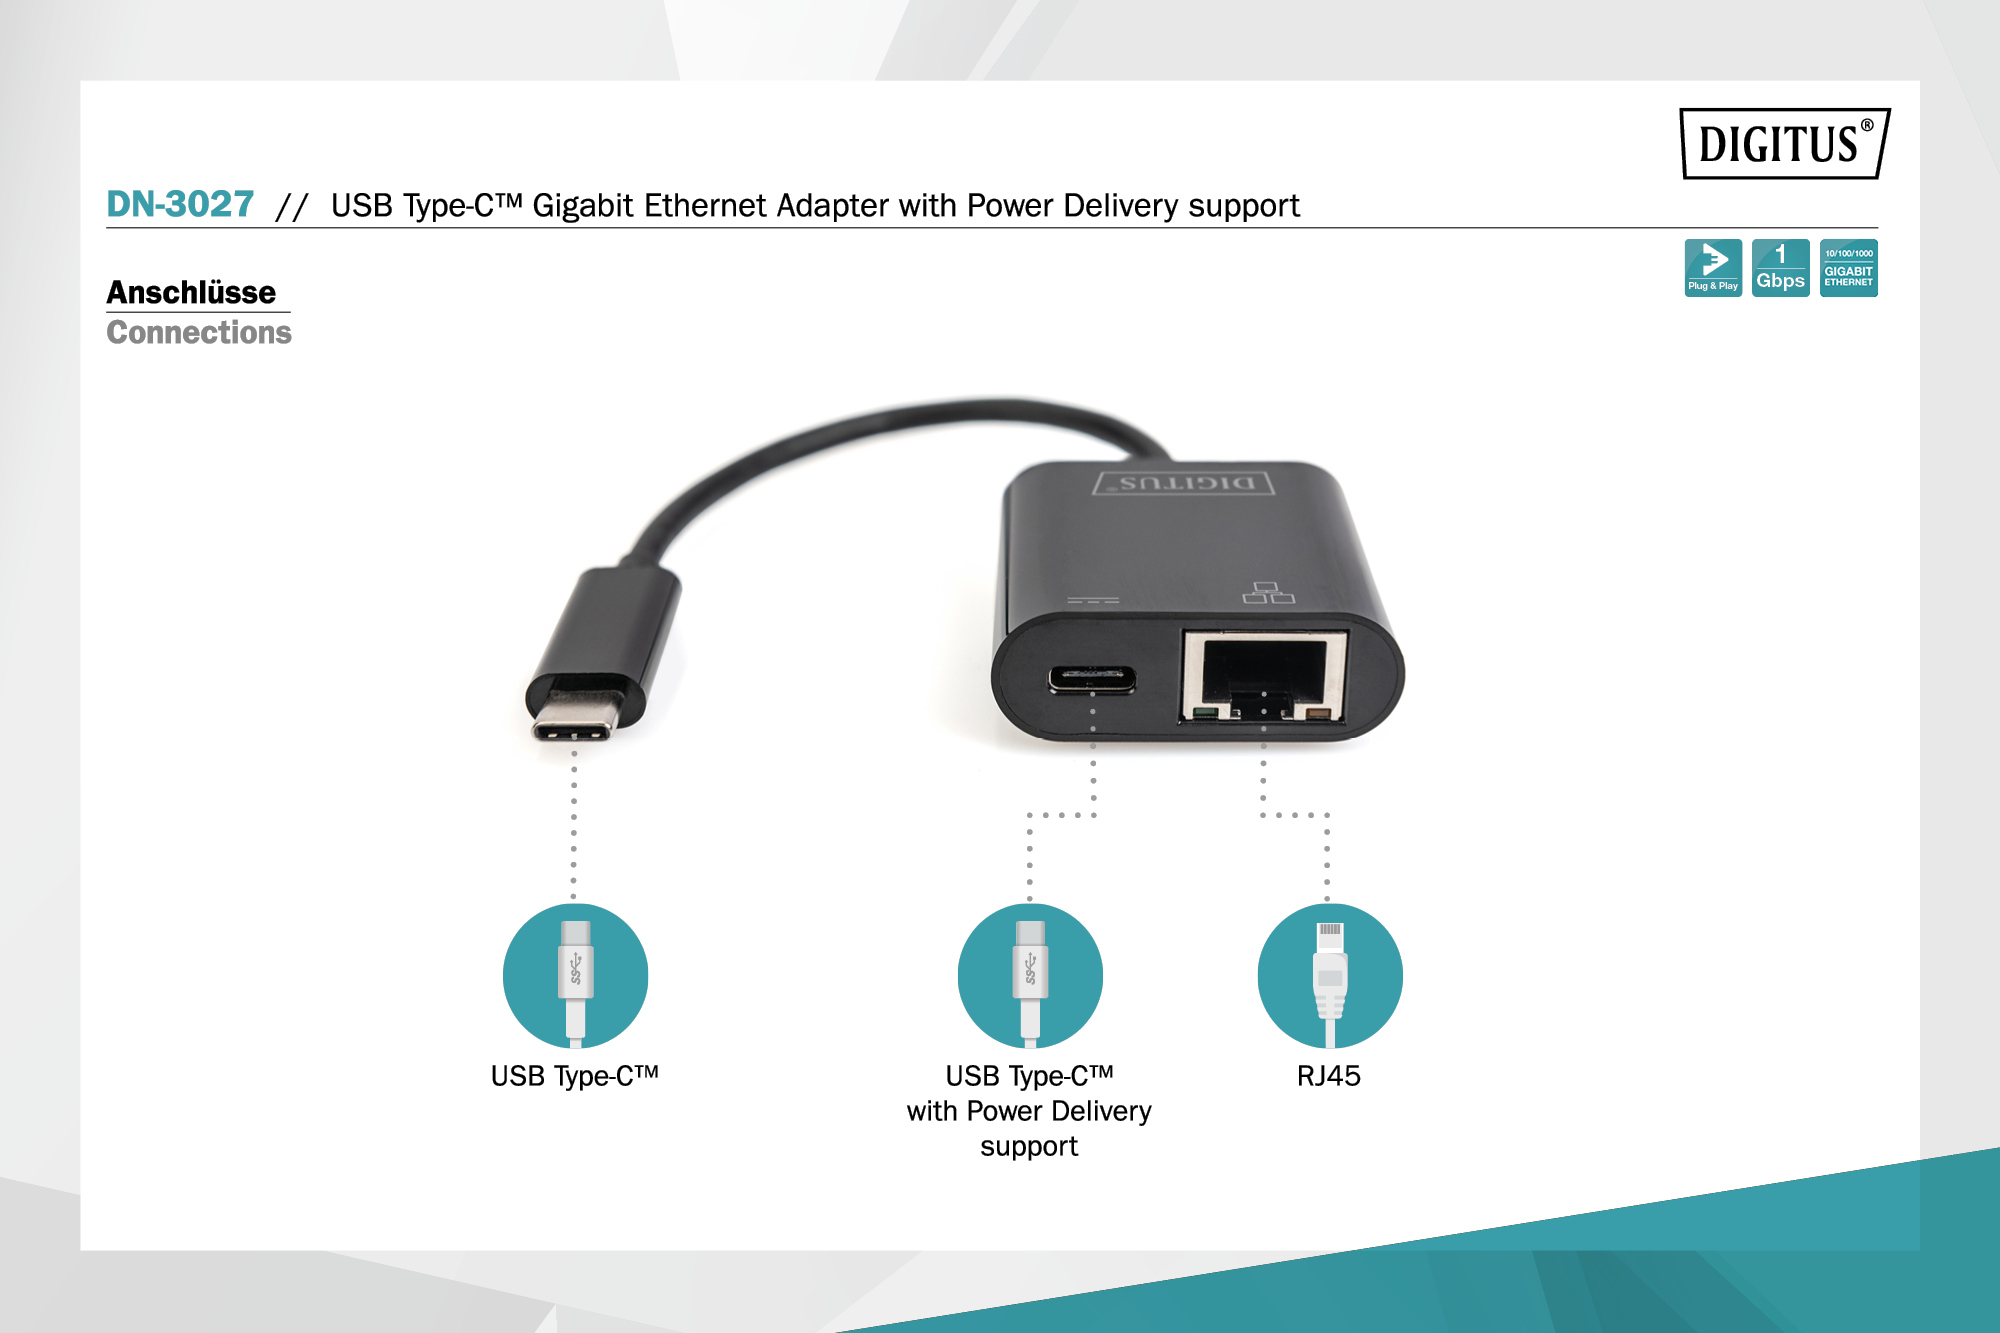 Digitus By Assmann Shop Usb Type C Gigabit Ethernet Adapter With Power Delivery Support